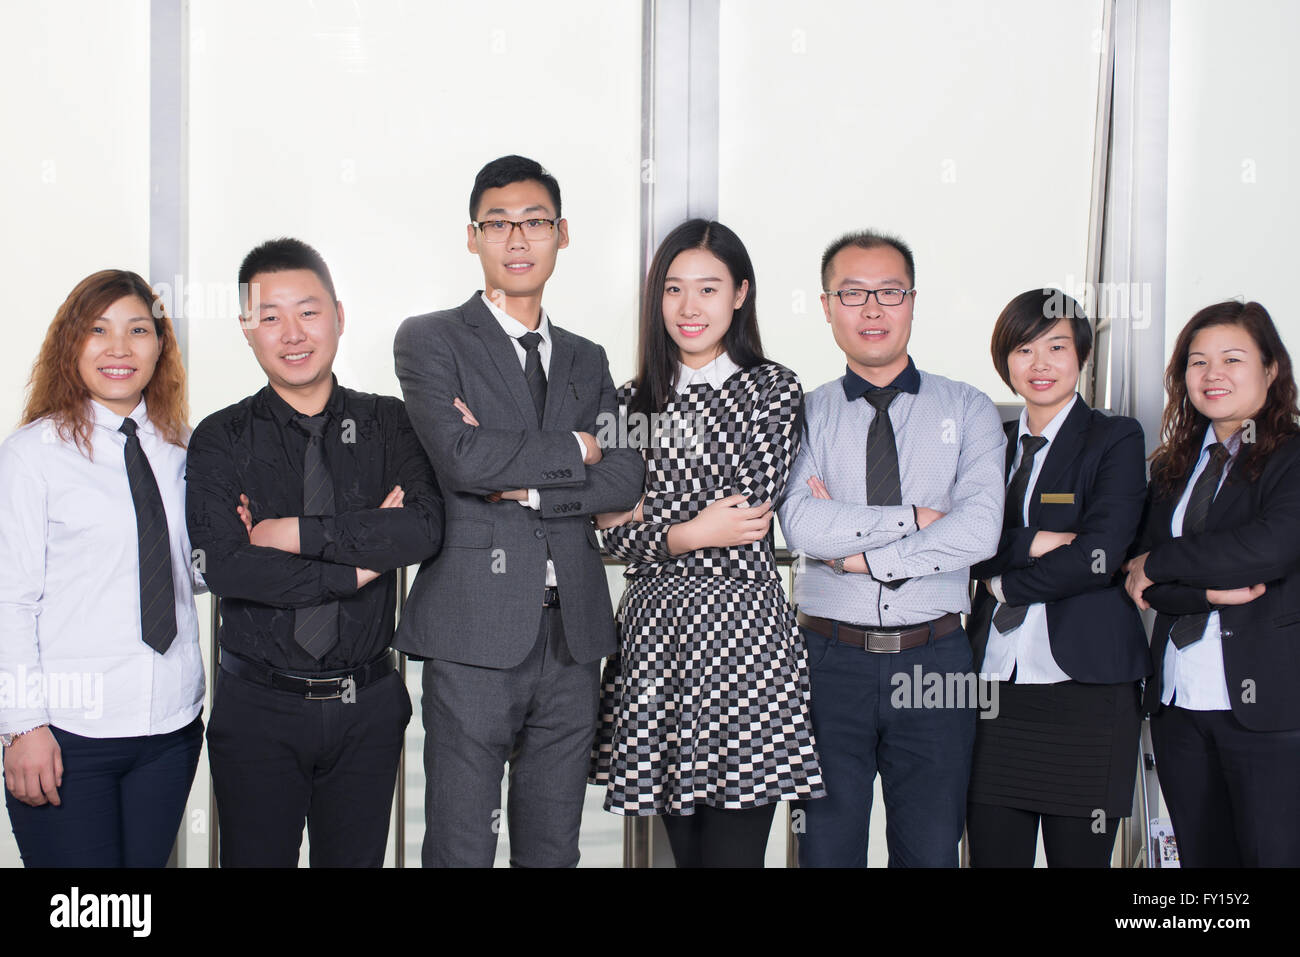 Group of smiling business people. Business team. Stock Photo